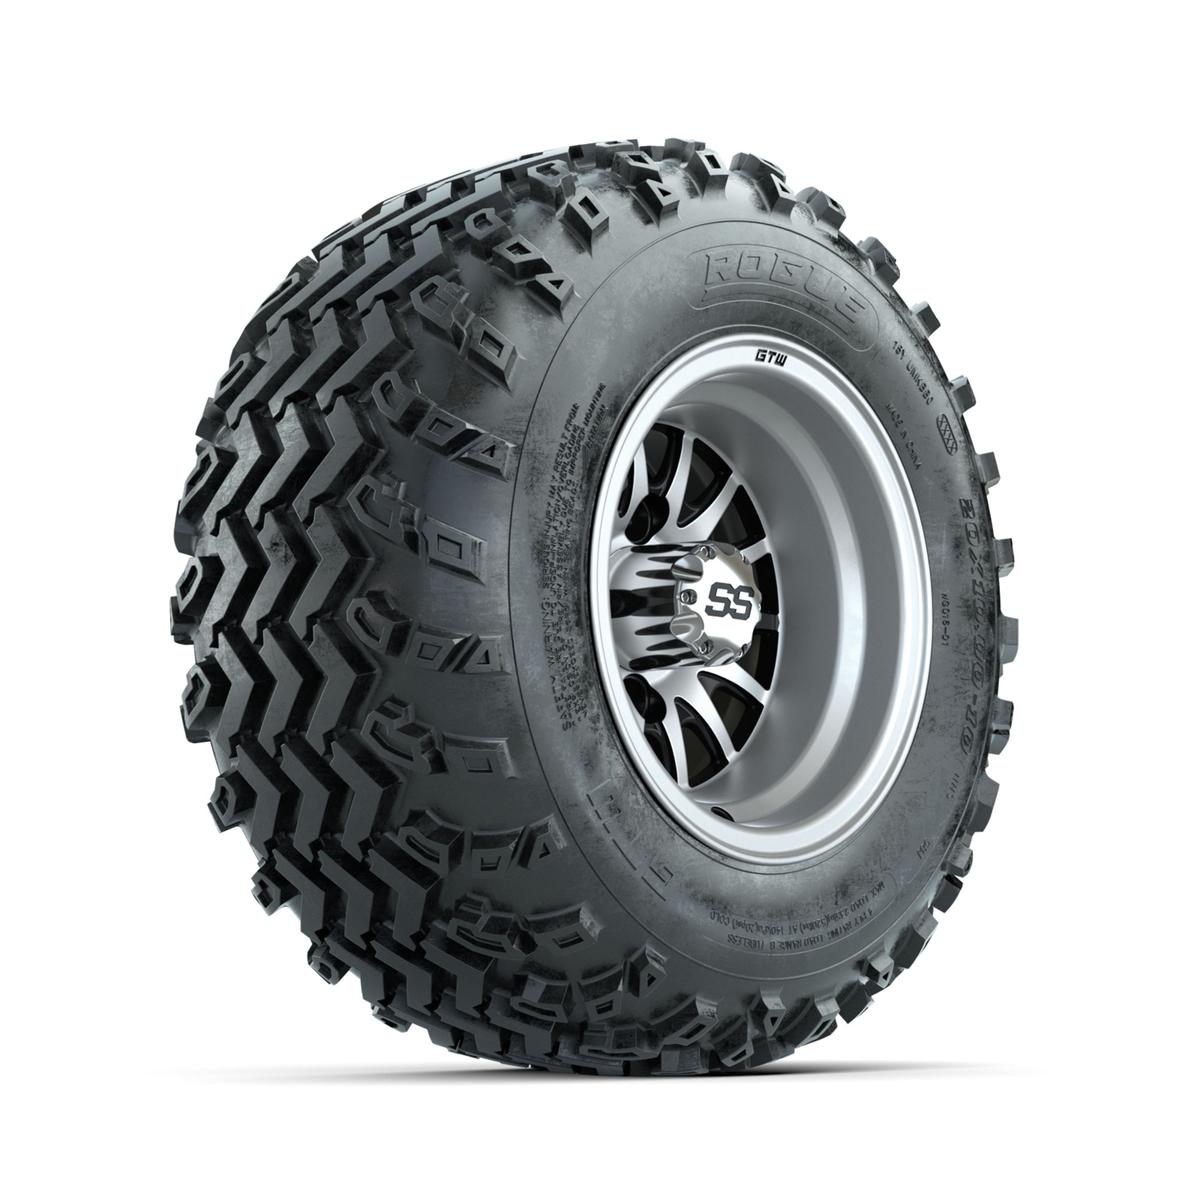 GTW Medusa Machined/Black 10 in Wheels with 20x10.00-10 Rogue All Terrain Tires – Full Set